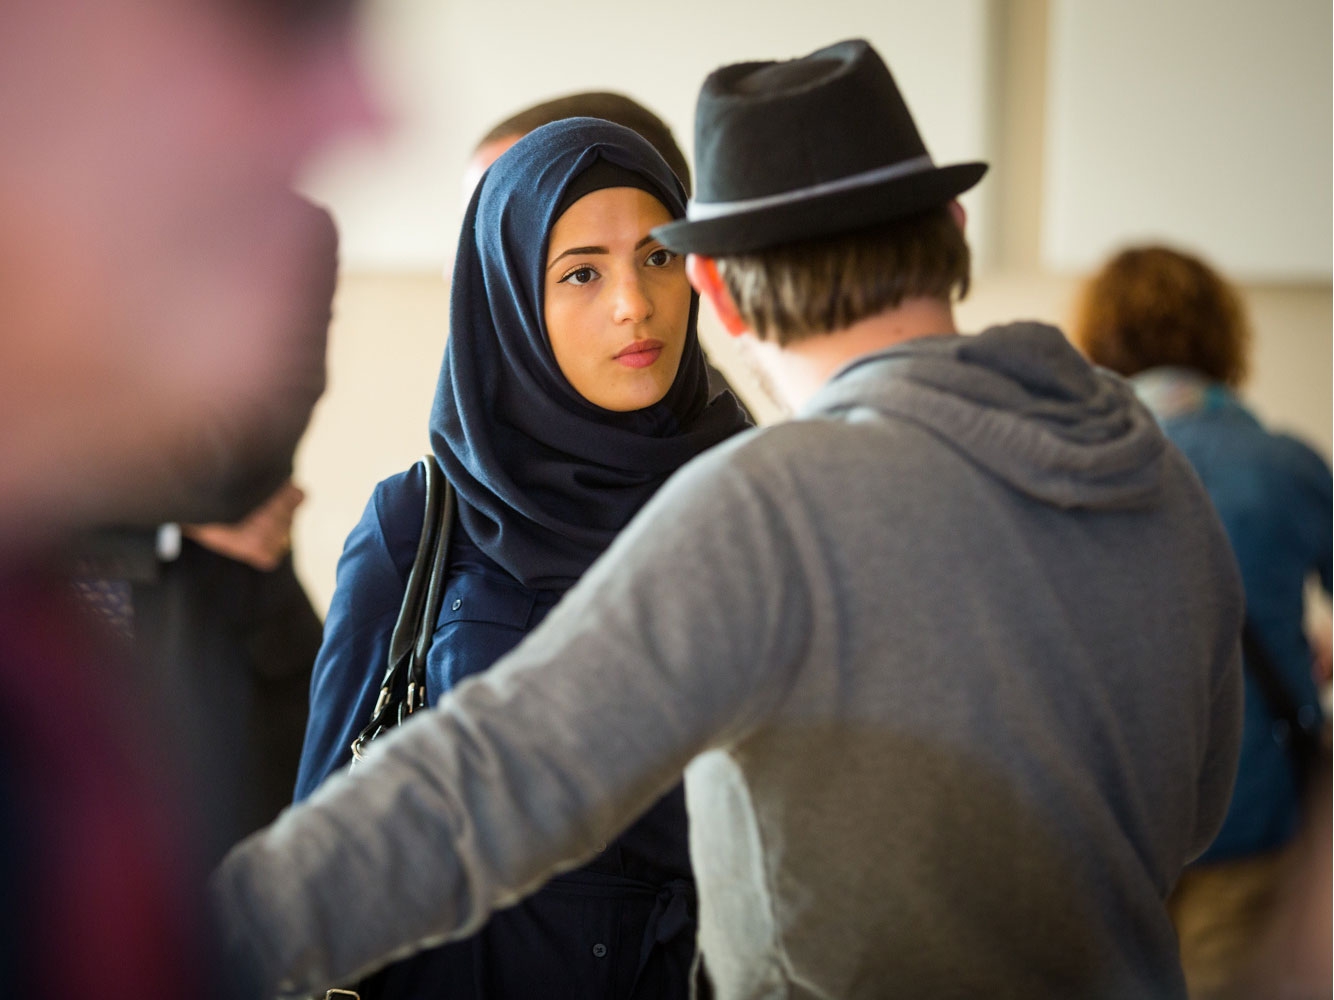 a girl with a headscarf talks to a boy with a hat